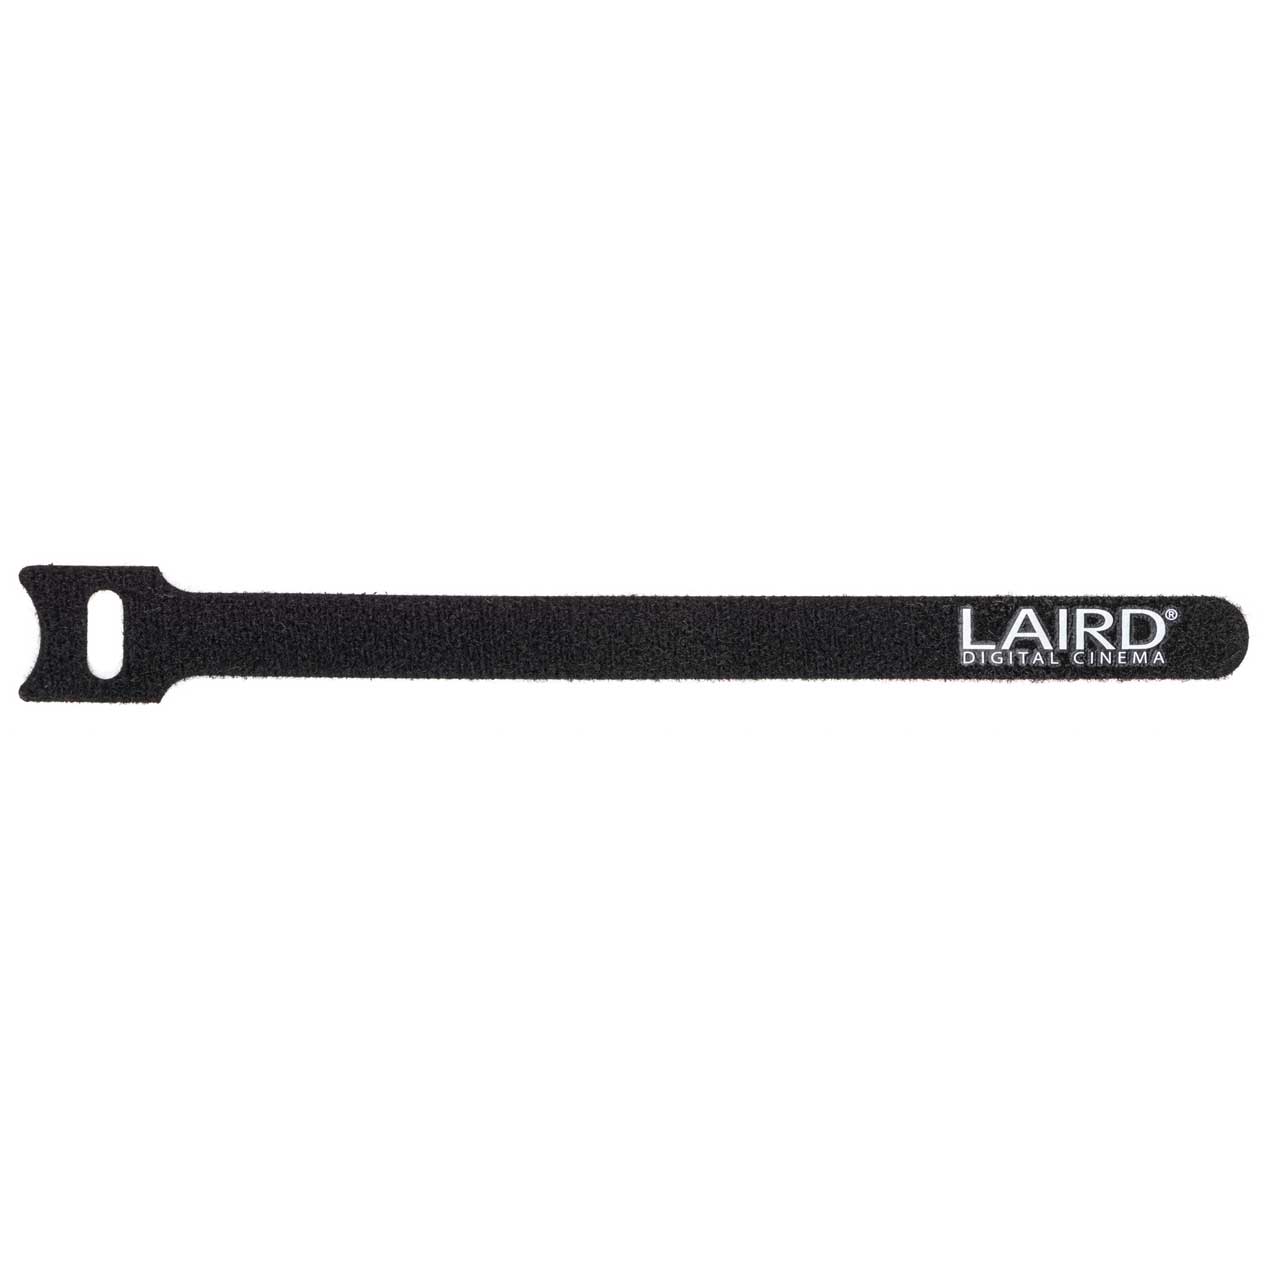 Laird Hook and Loop Cable Wrap 12mm x 180mm Black with White Logo - 2500 Pack LDC-HKNLP-2500PK